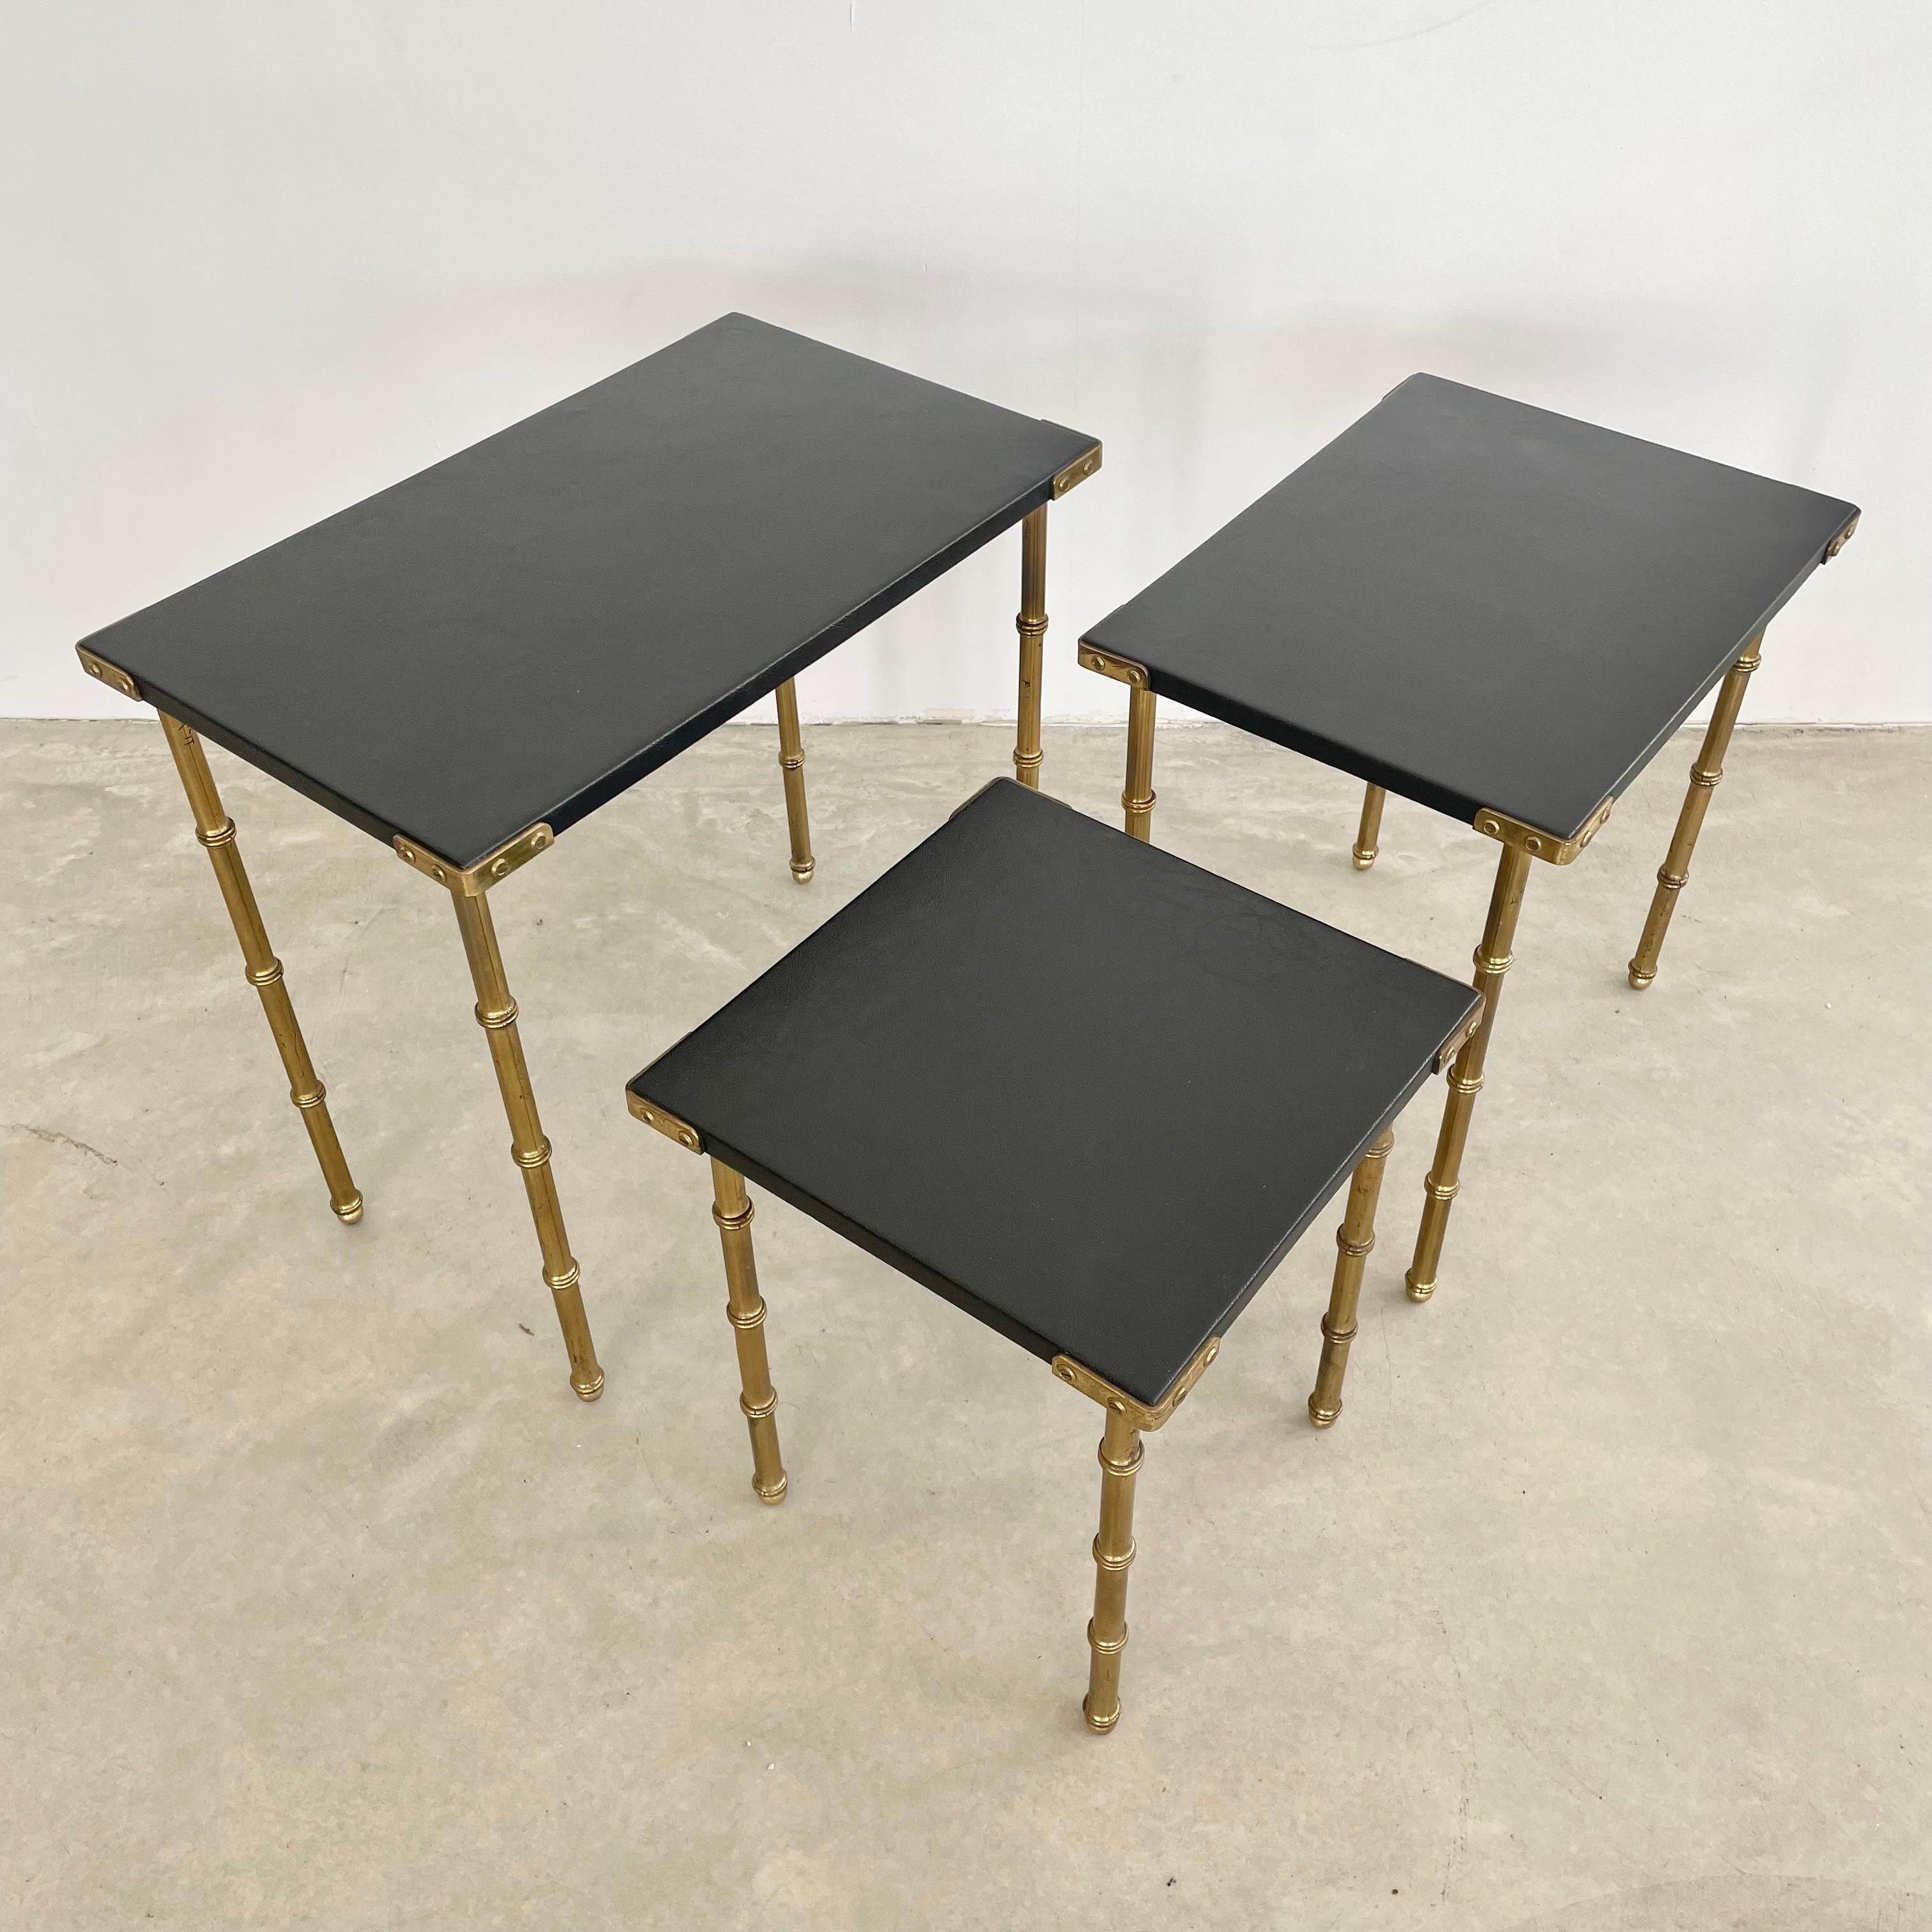 Set of 3 Jacques Adnet Nesting Tables, 1950s France For Sale 6